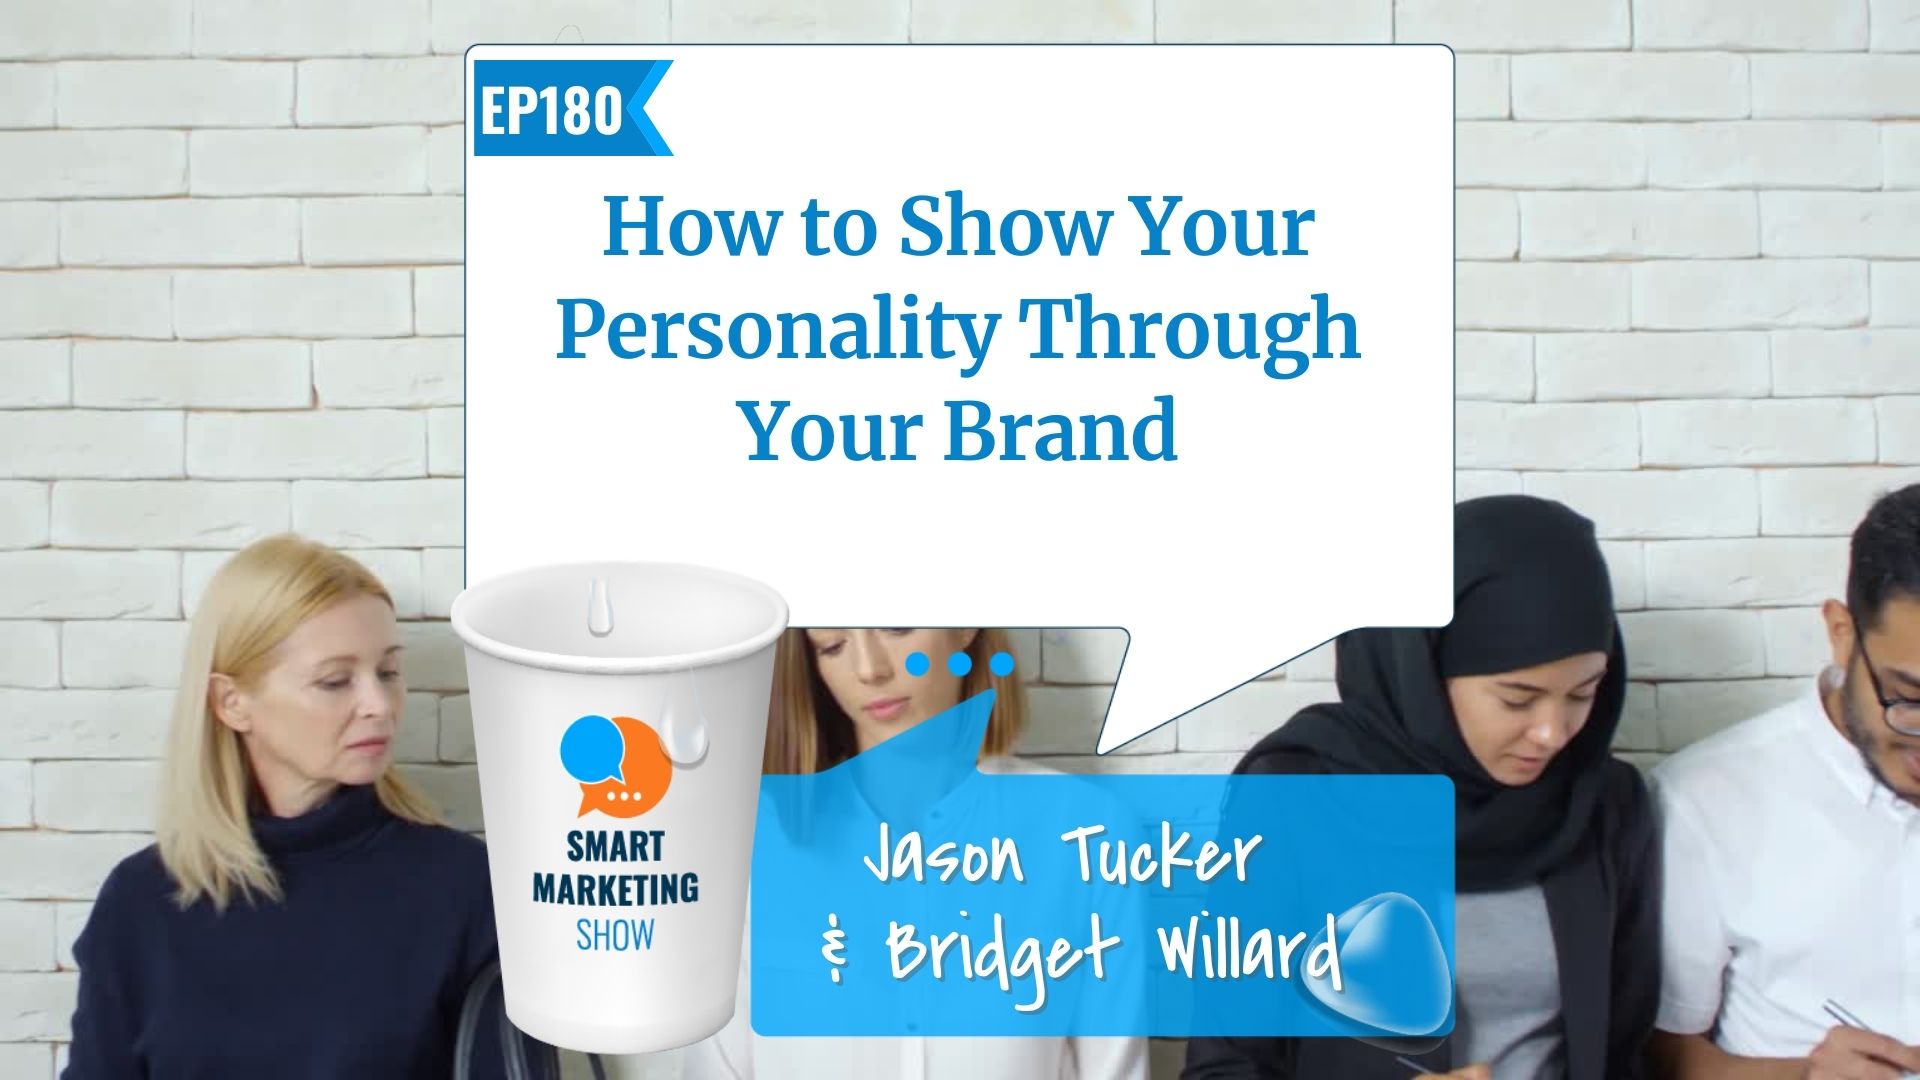 EP180 – How to Show Your Personality Through Your Brand